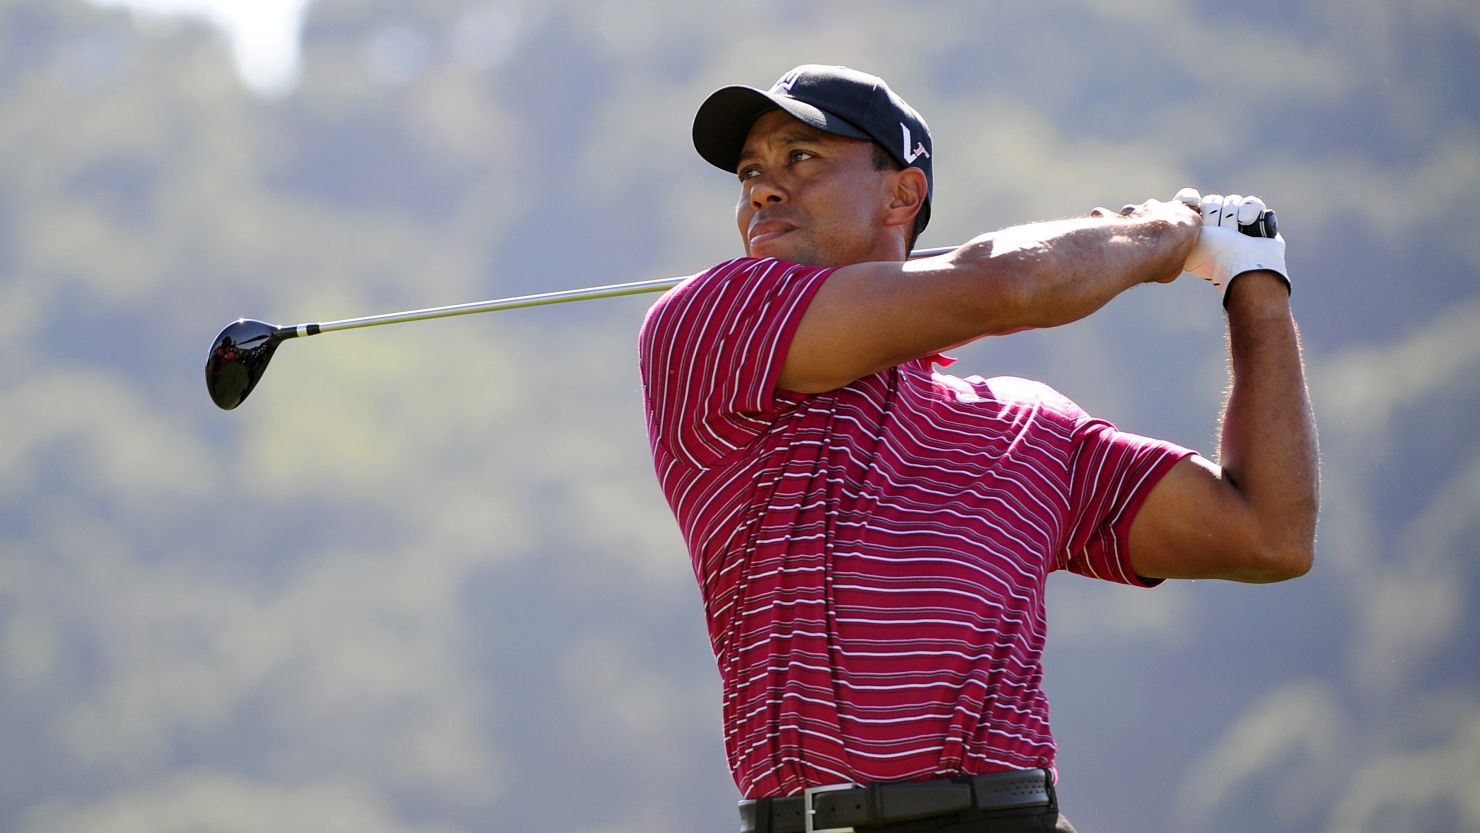 Former world number one Tiger Woods has not won a PGA Tour tournament since November 2009.